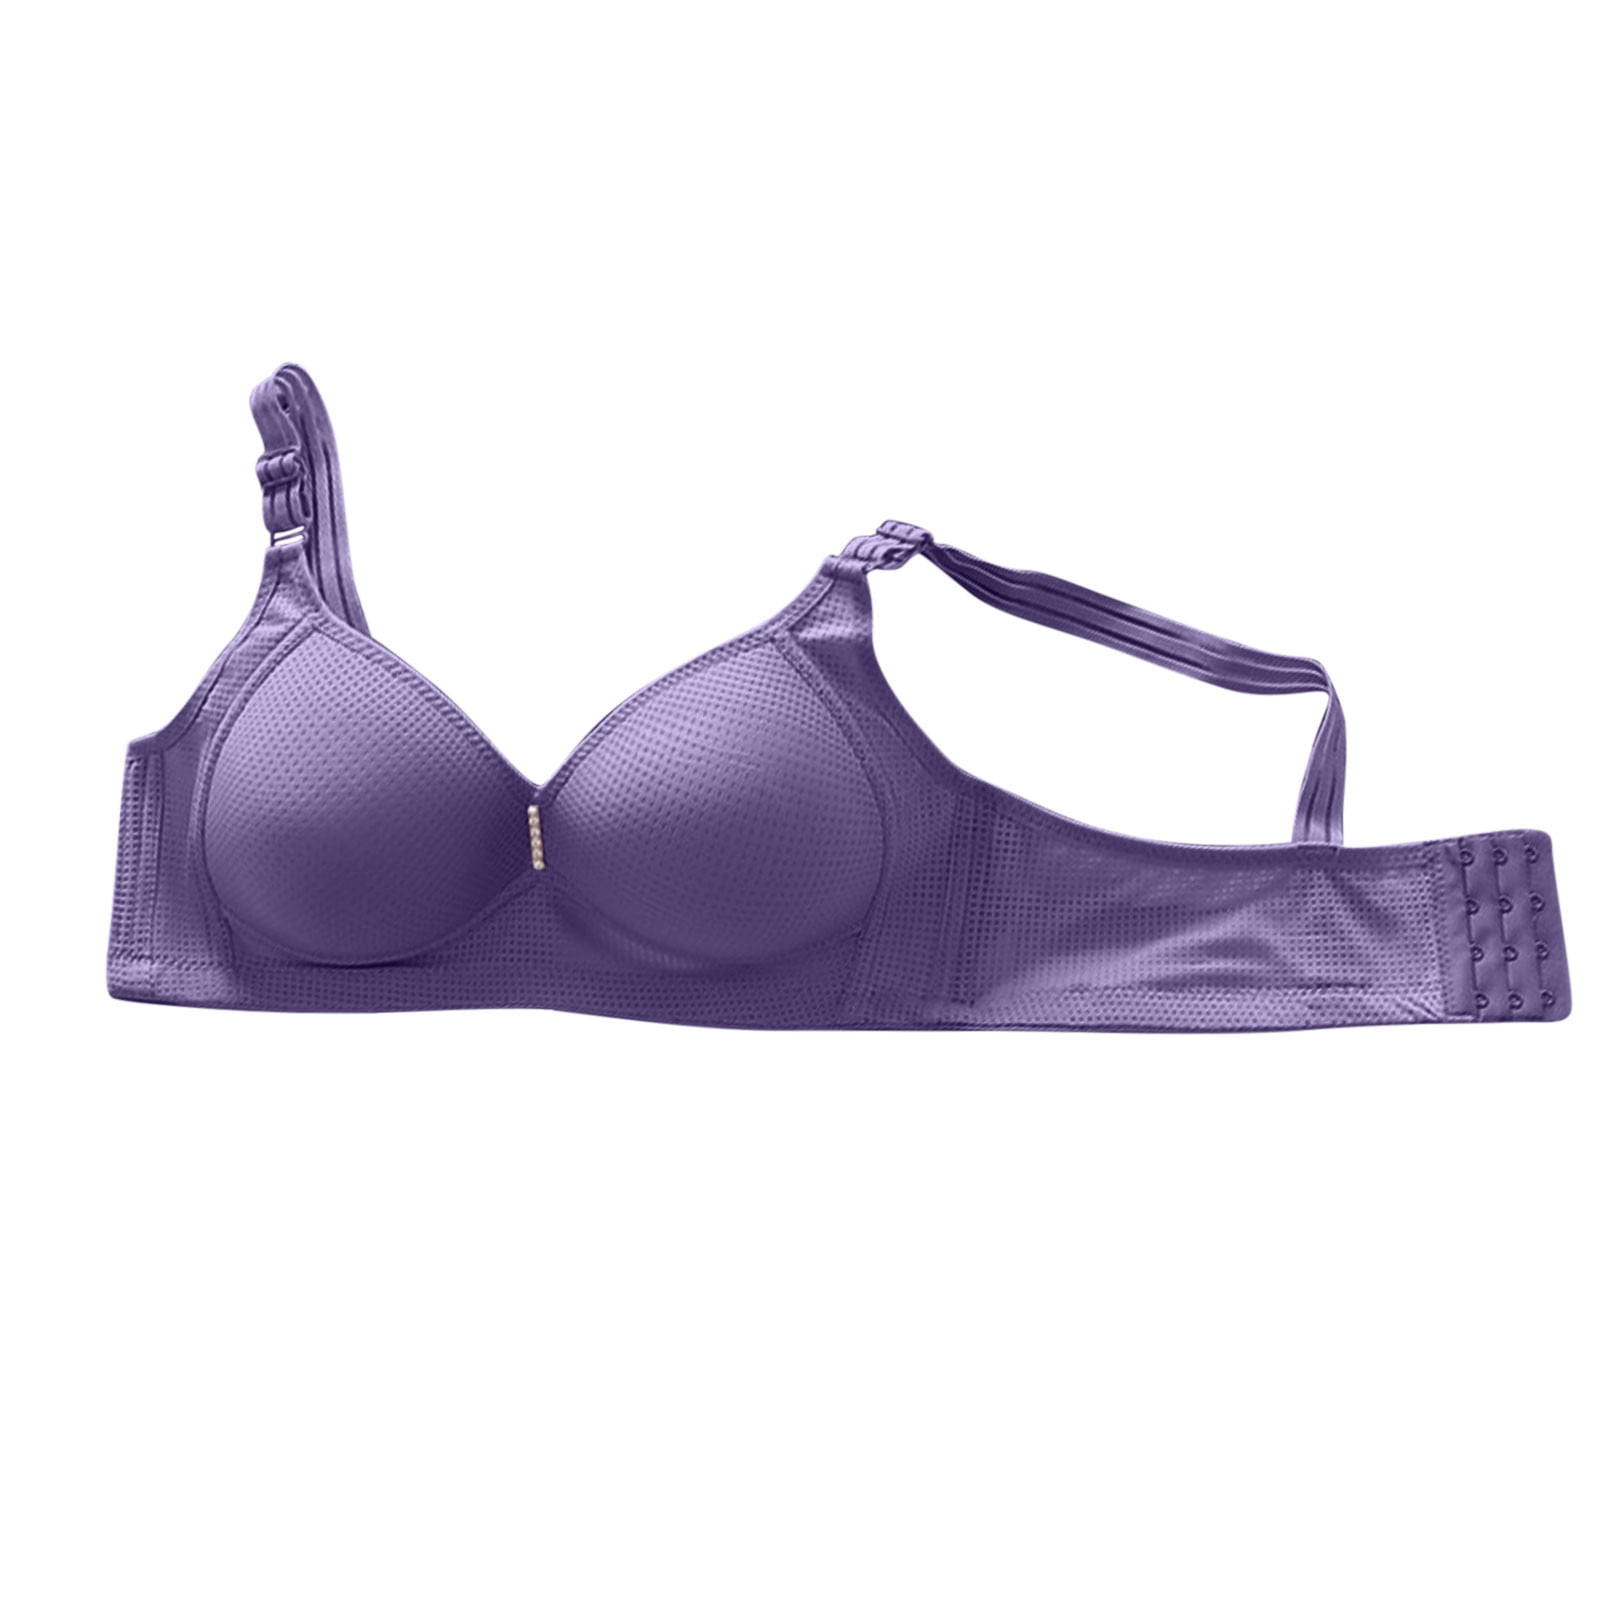 Odeerbi Wireless Lounge Bras for Women Double Breasted Comfortable